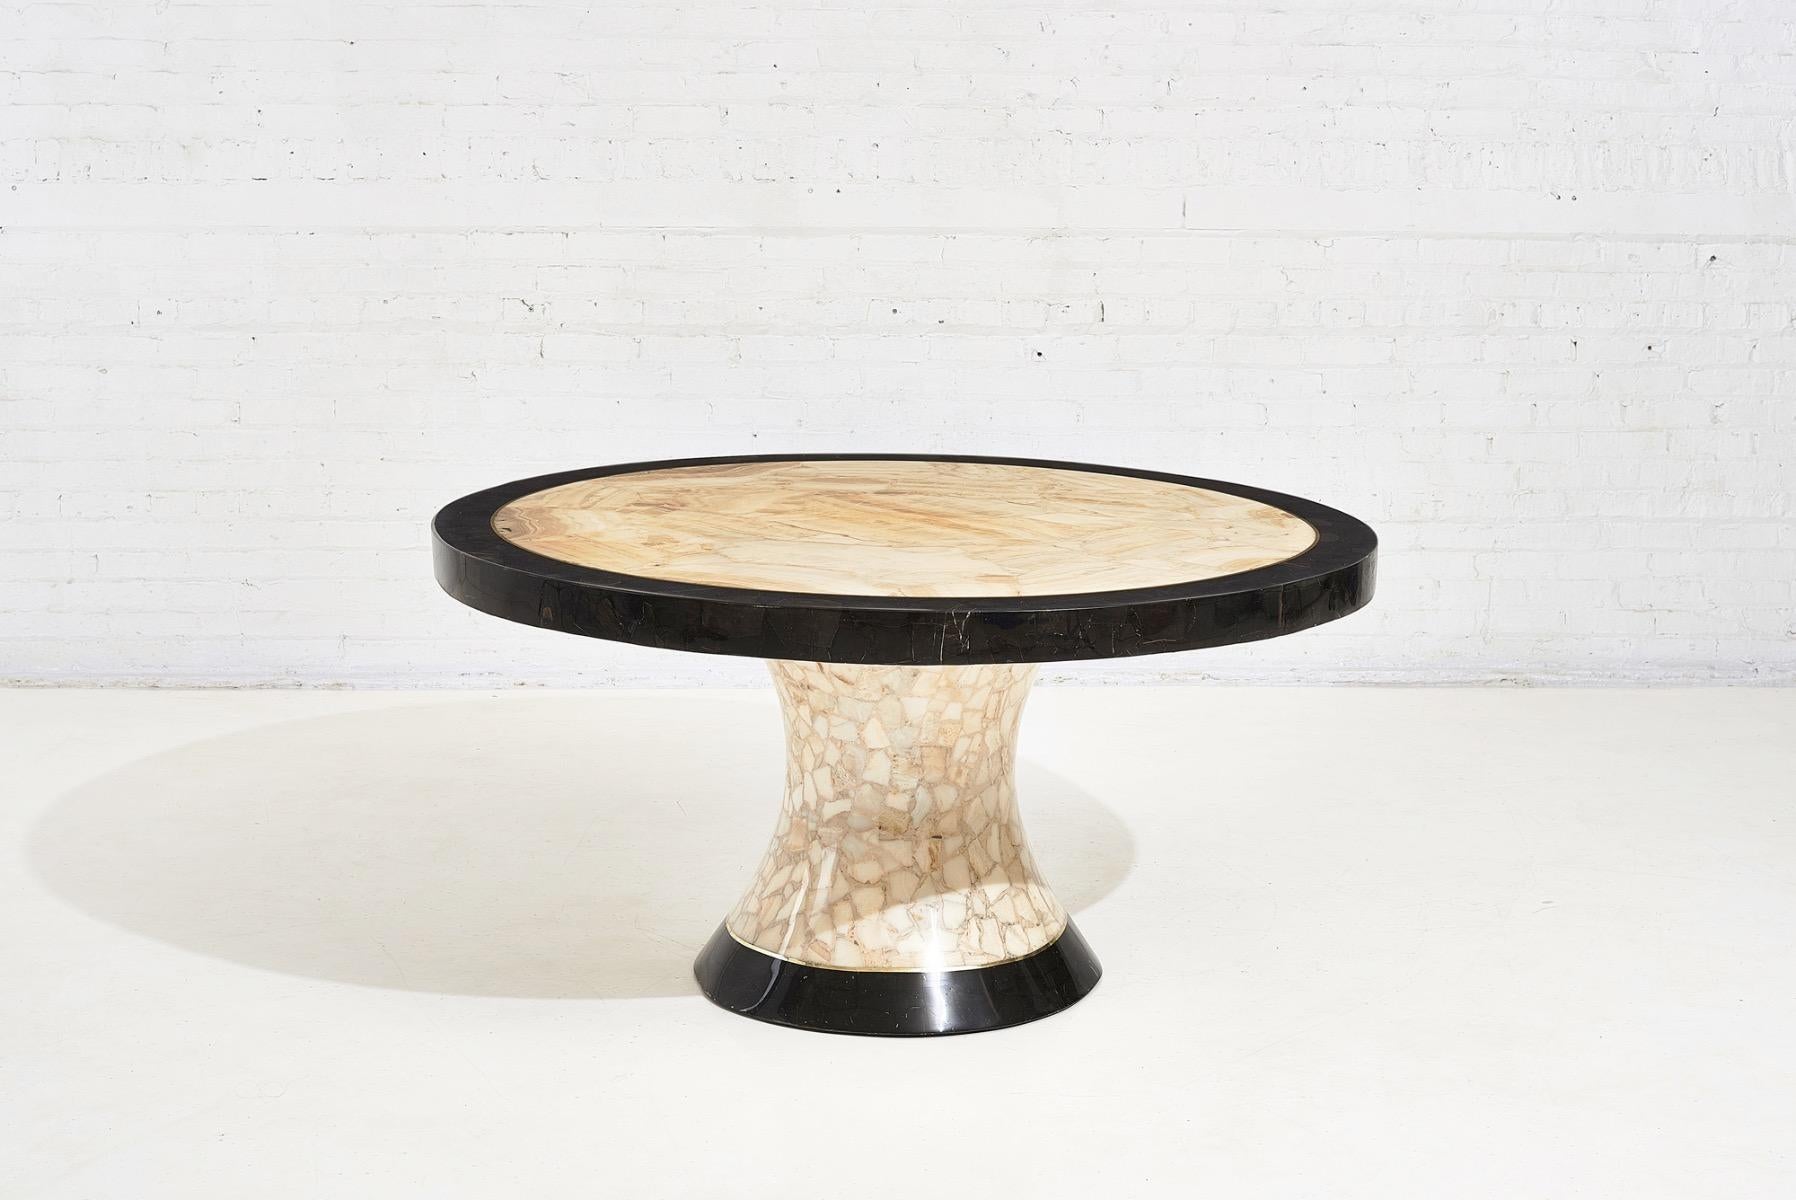 Arturo Pani onyx and marble dining table, Muller’s Mexico.
 